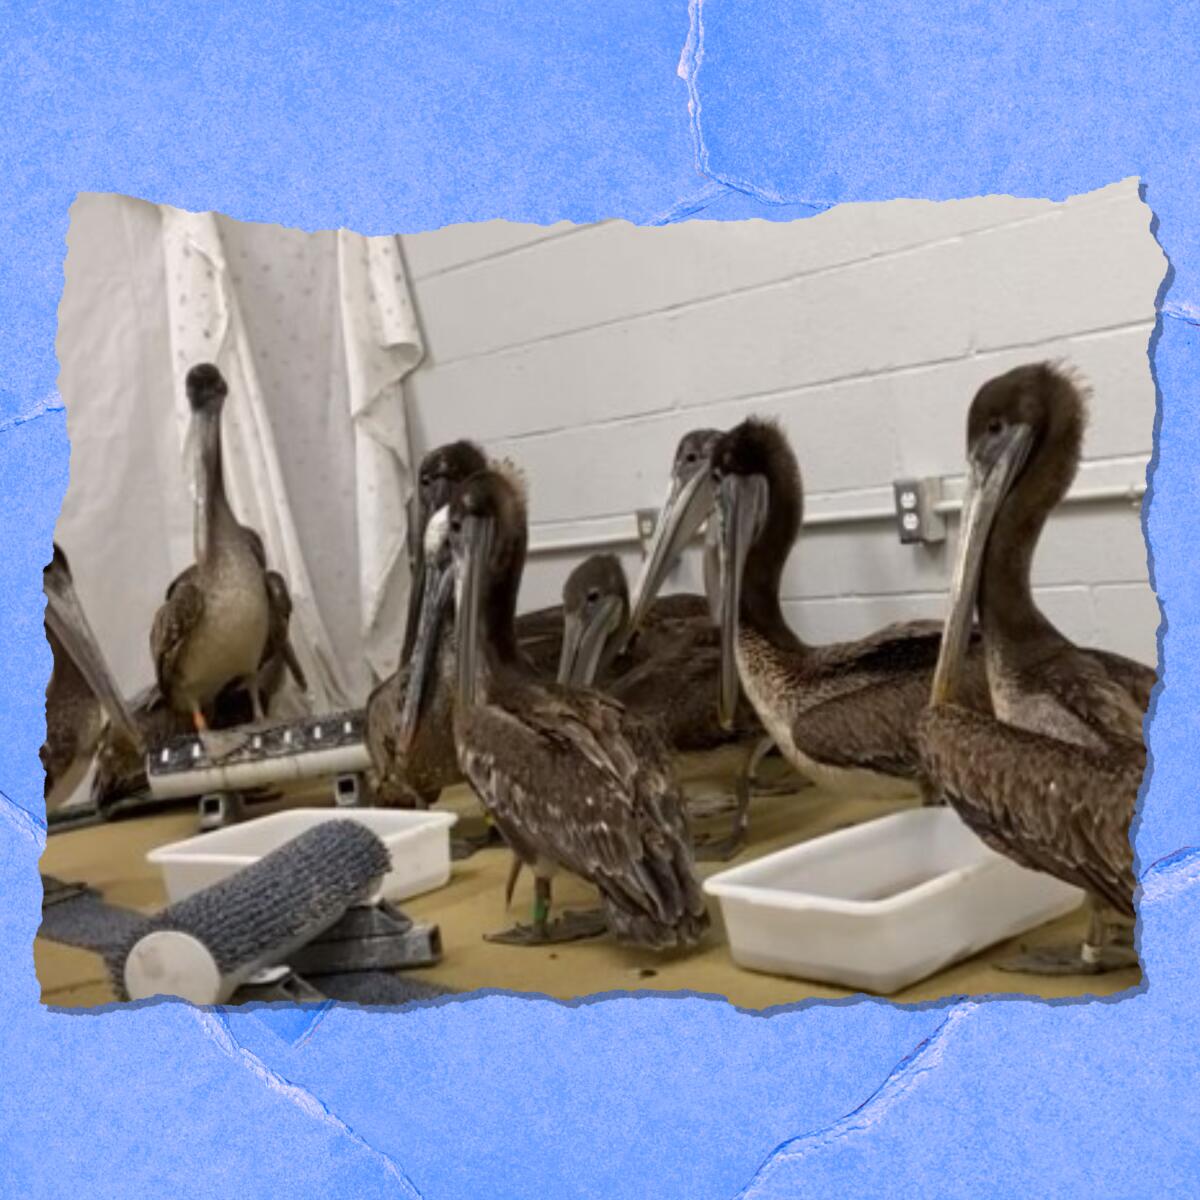 A group of pelicans inside a building with plastic pans of water.